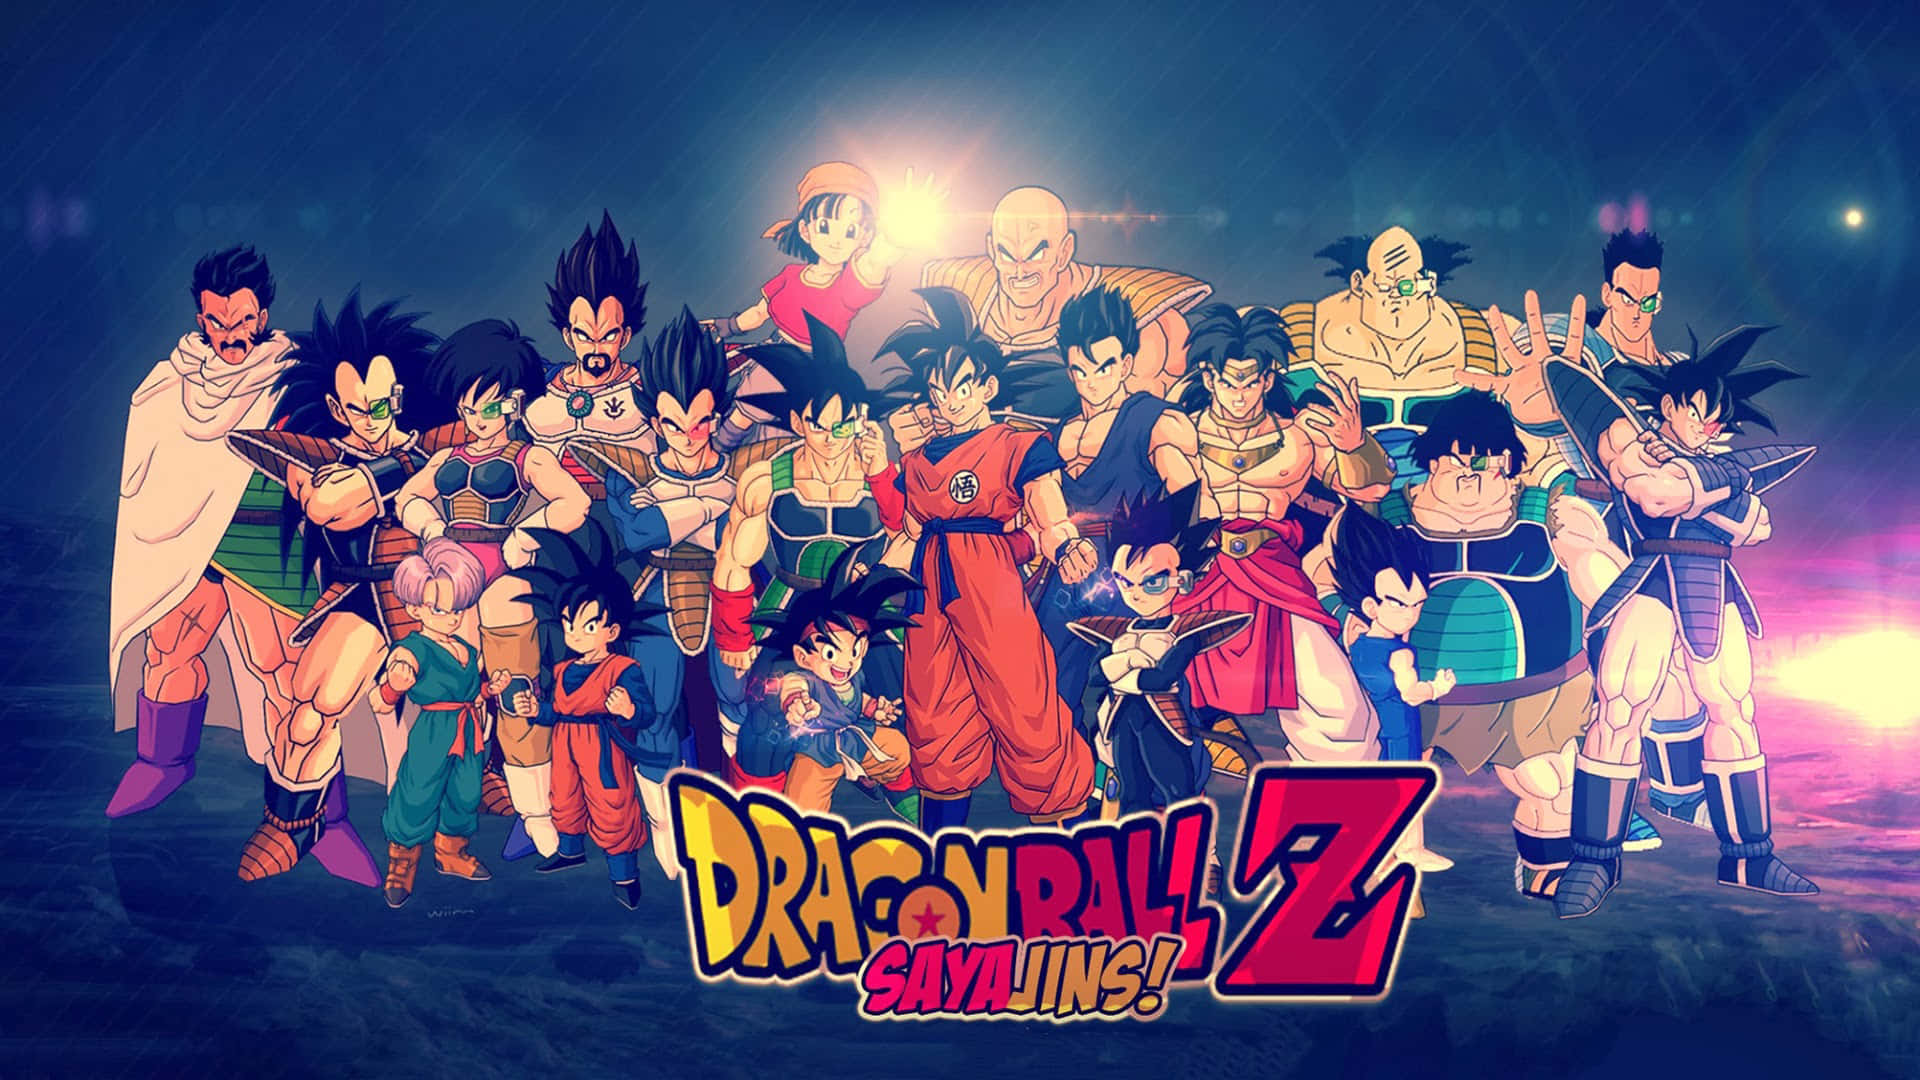 The Ultimate Dragon Ball Z Characters Gathering Wallpaper